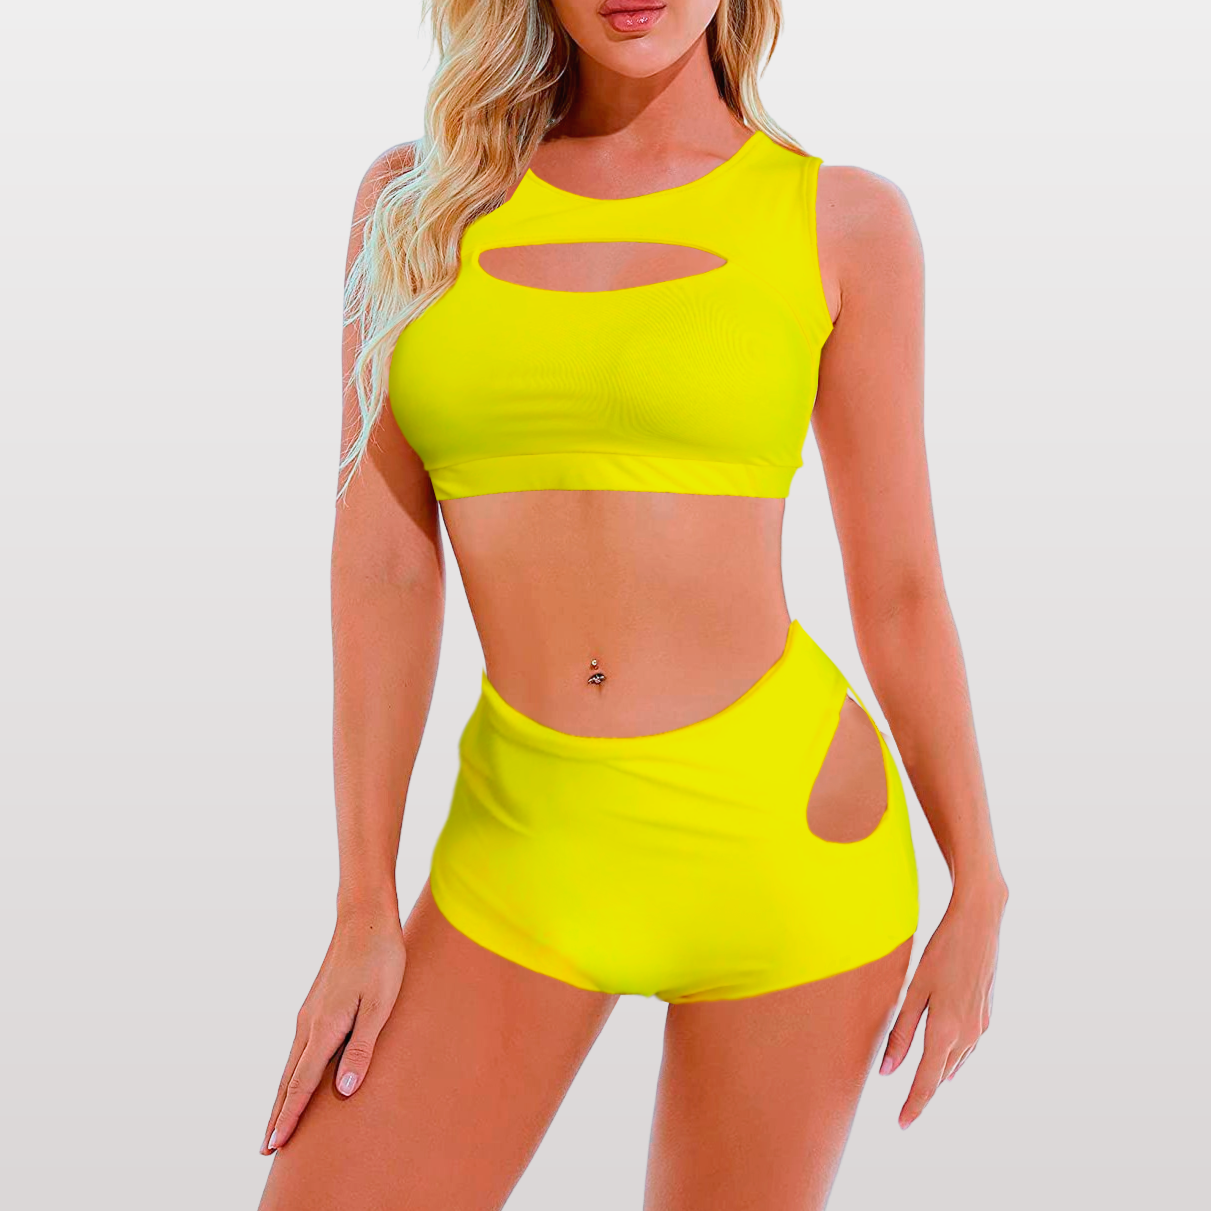 Yellow pole dance outfit with best support of bust and side cut-out panty